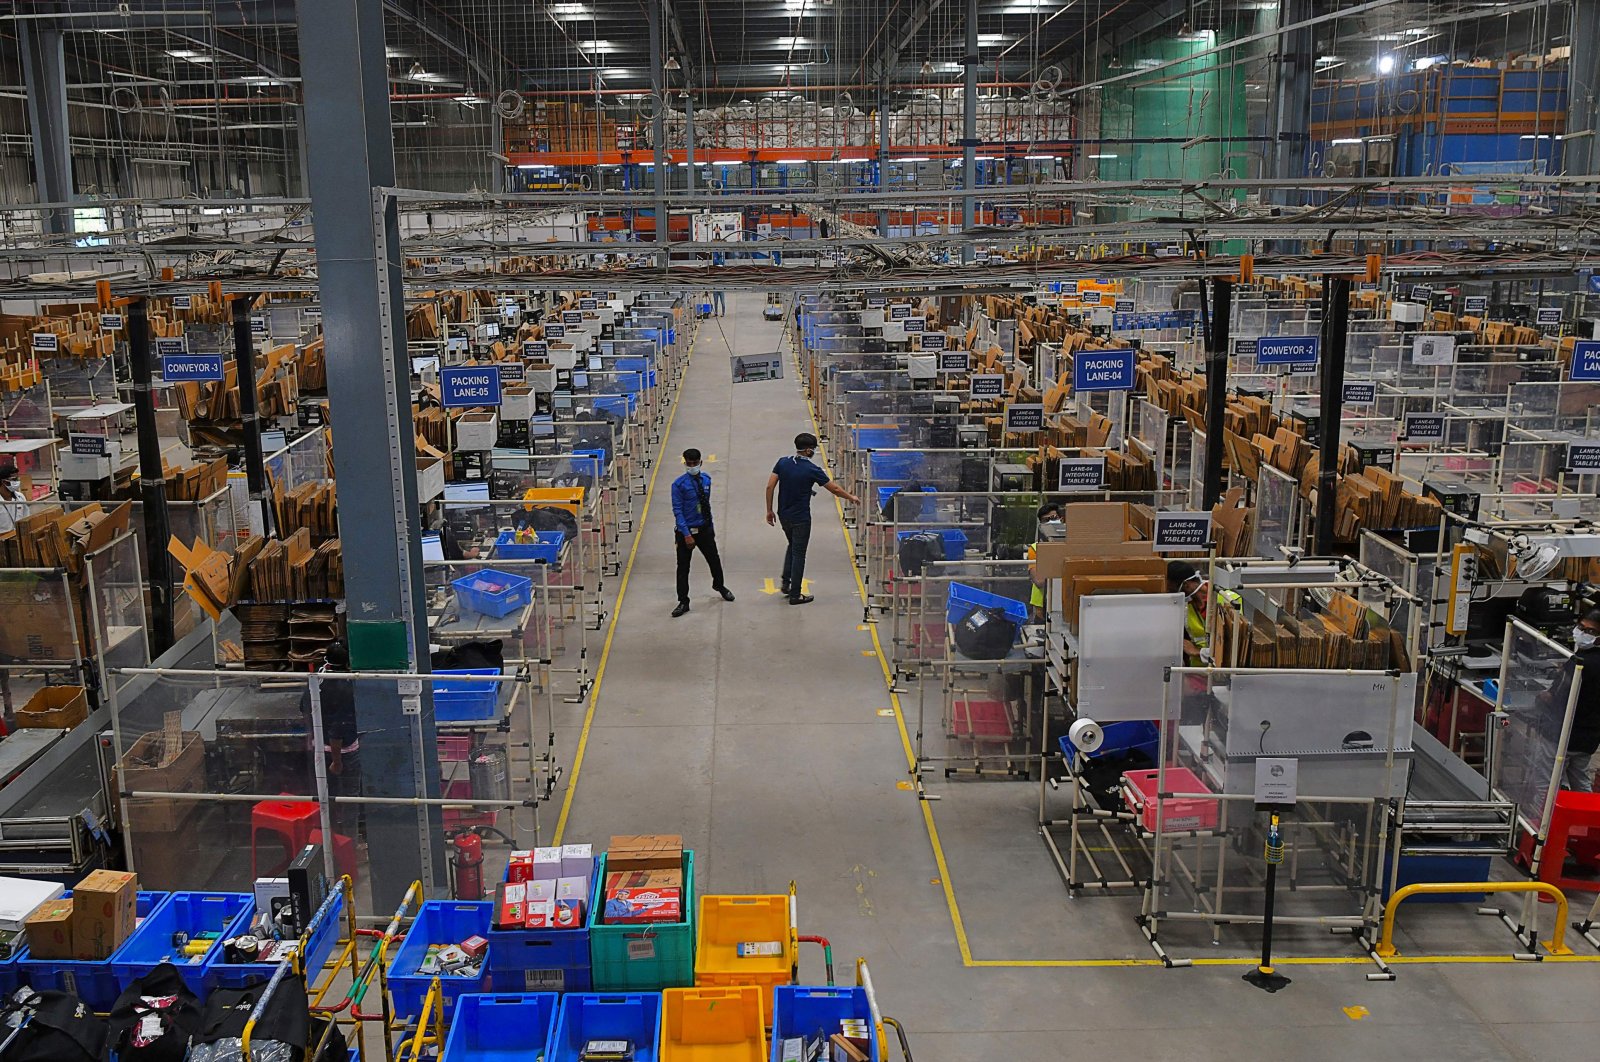 Workers walk in the aisle of a packaging area at the Flipkart fulfillment center in Bangalore, India on Sept. 23, 2021, ahead of the Flipkart Big Billion Days 2021 sale. (AFP Photo)